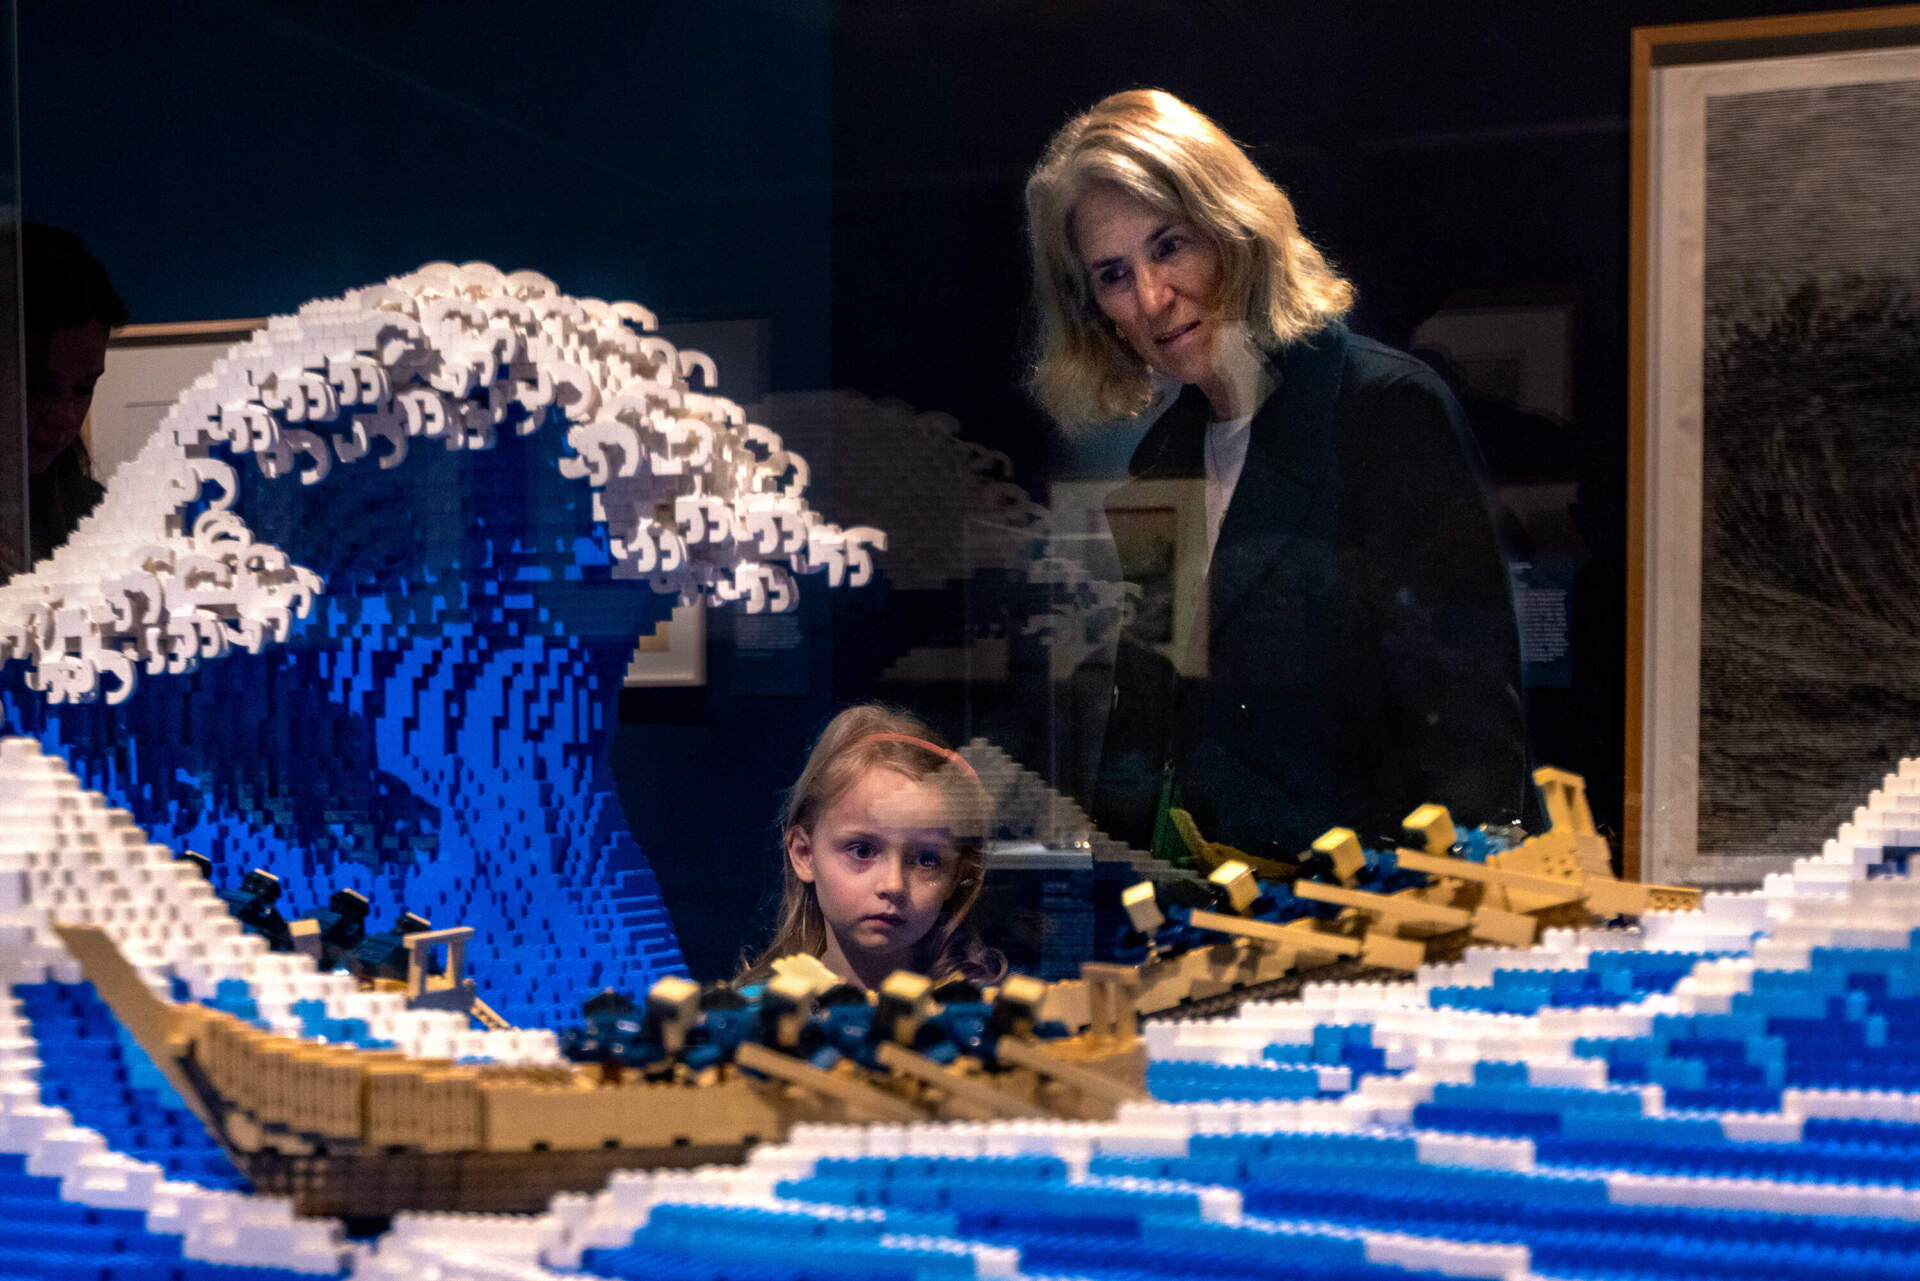 Five-year-old Eleanor Laird and her grandmother Amy Clarkson gaze at “The Great Wave built by Jumpei Mitsui with Lego Blocks” at the Hokusai: Inspiration and Influence show at the Museum of Fine Arts Boston. (Jesse Costa/WBUR)